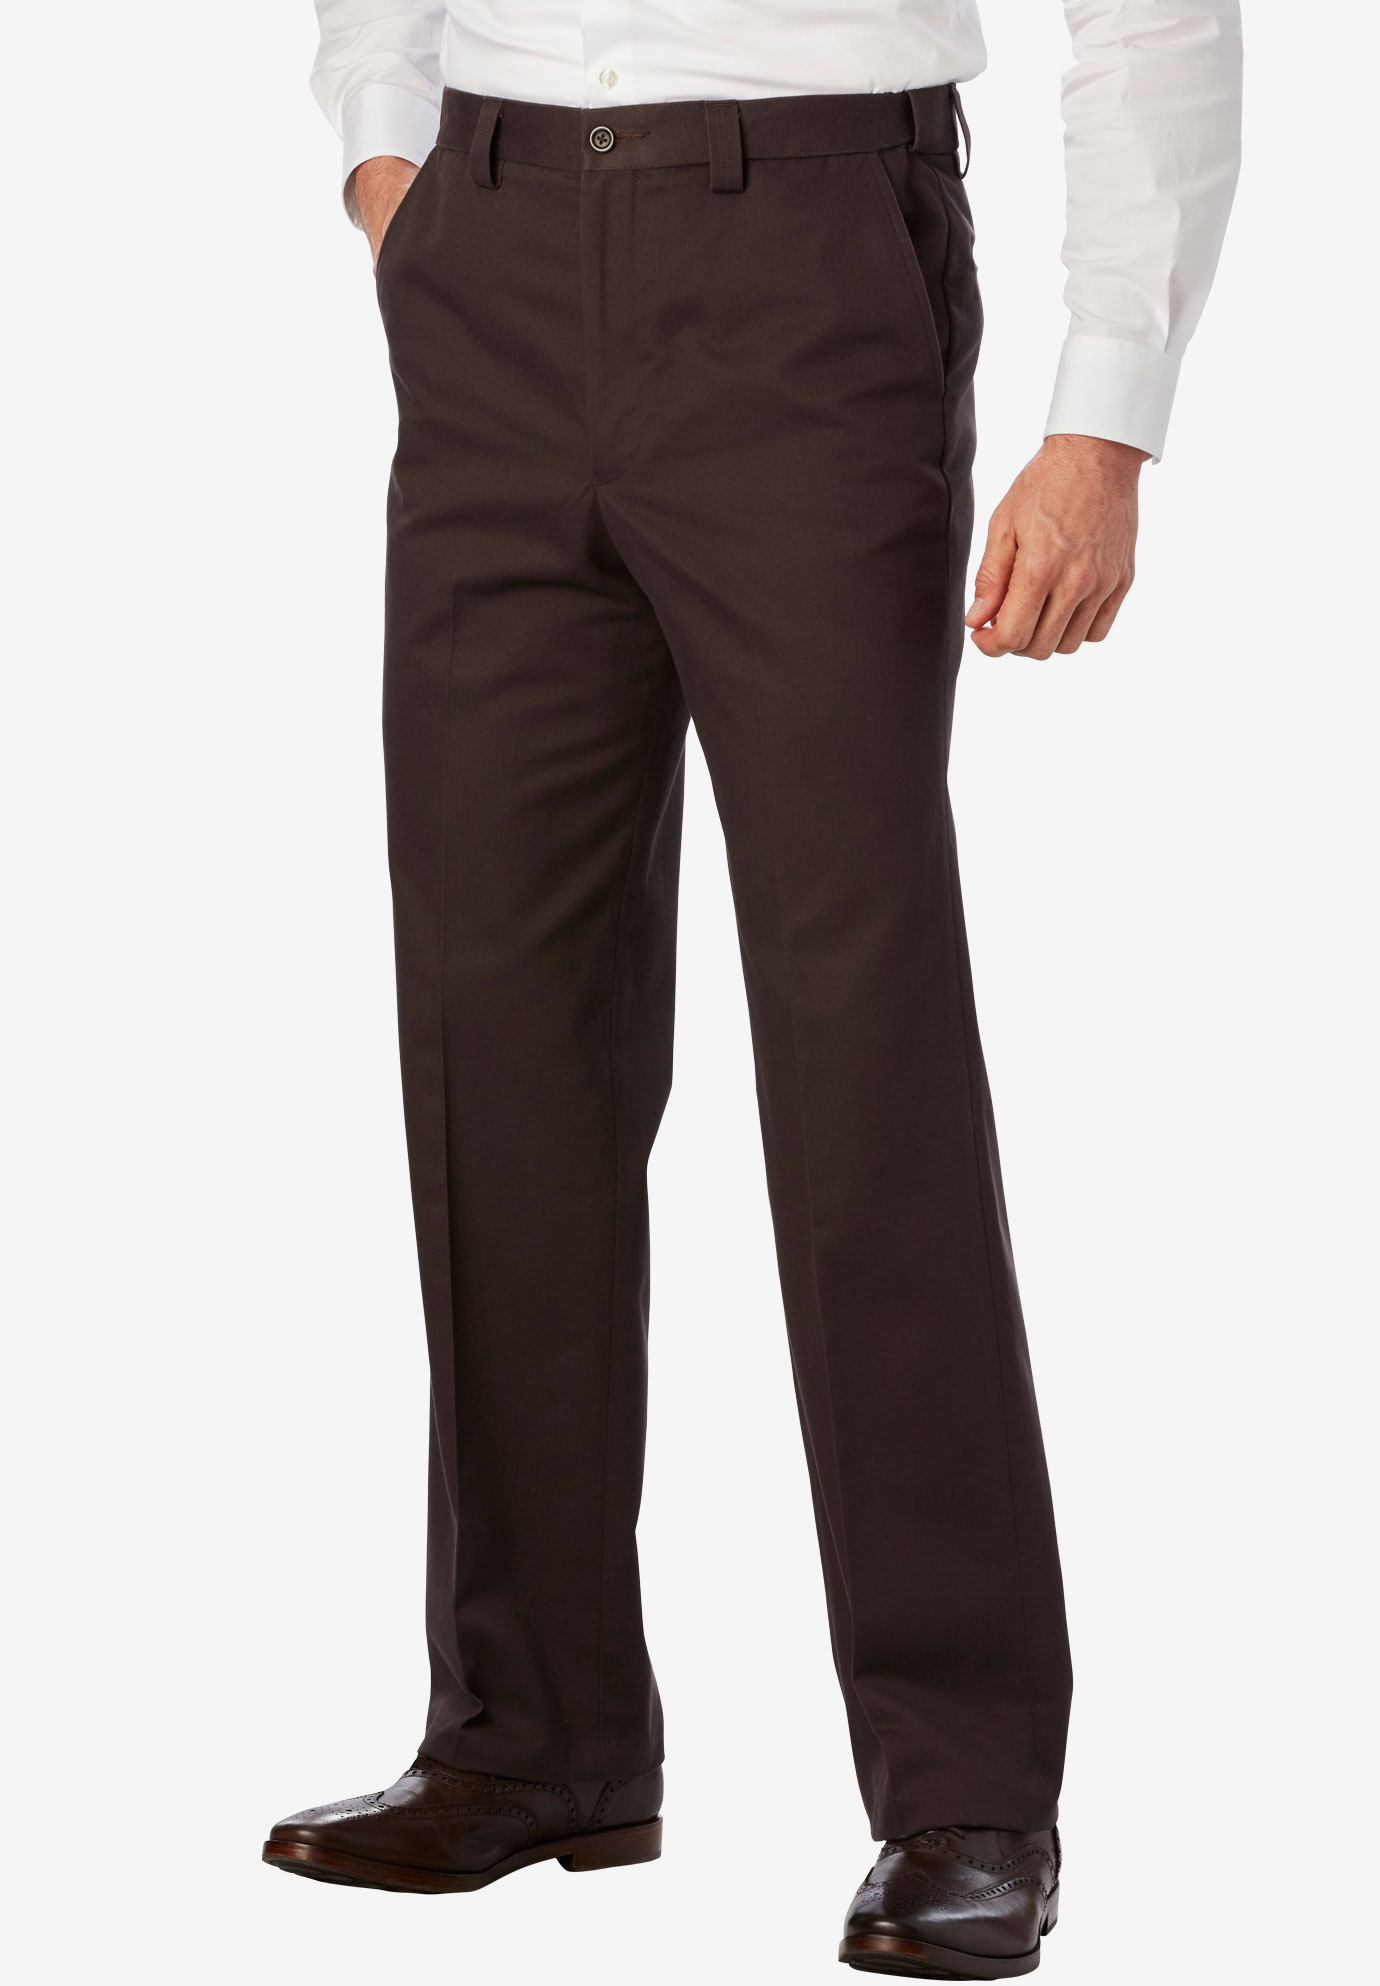 Relaxed Fit Wrinkle-Free Expandable Waist Plain Front Pants, 